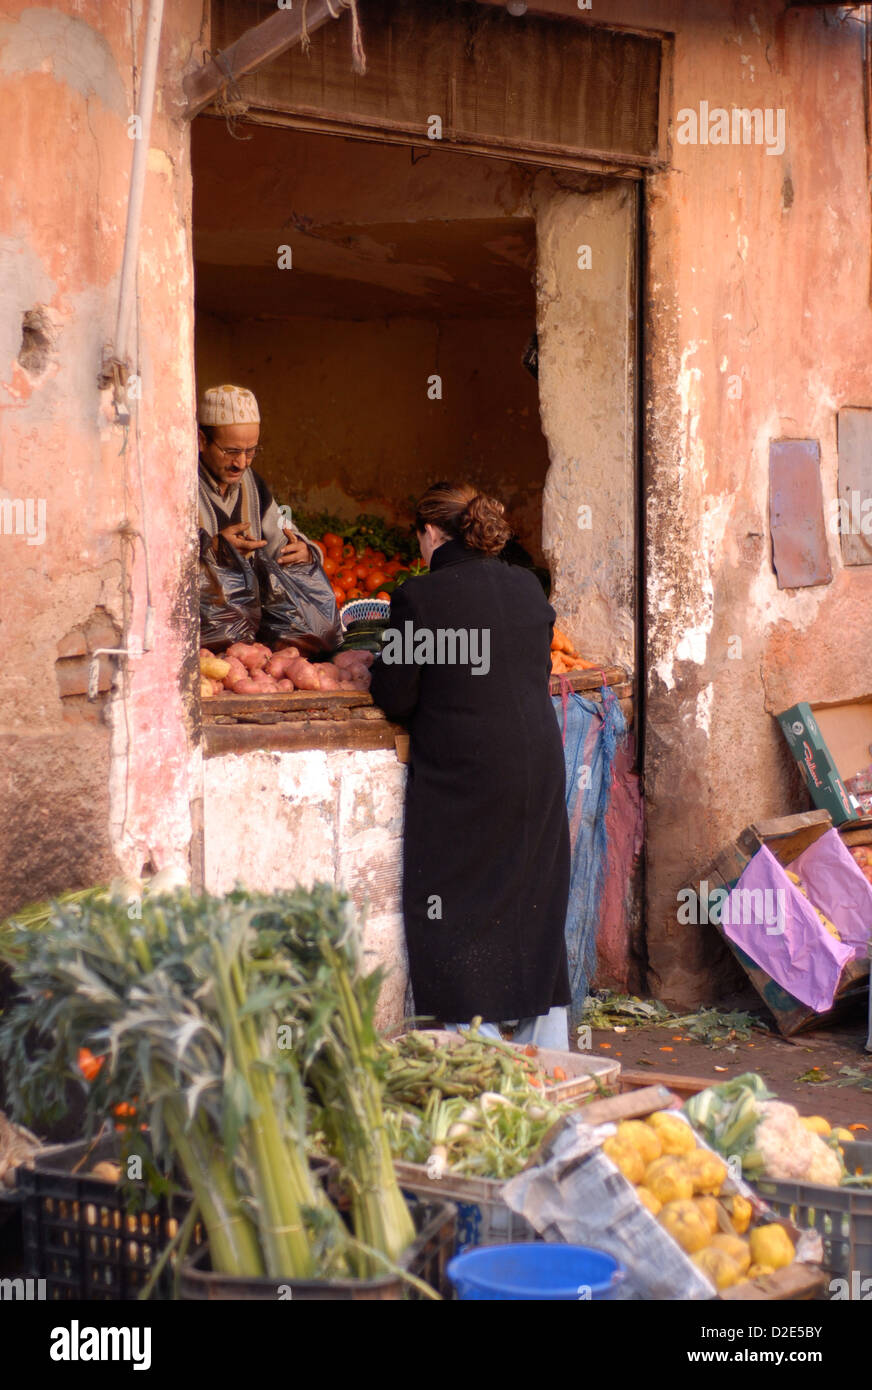 Woman buying vegetables in Marrakech Banque D'Images